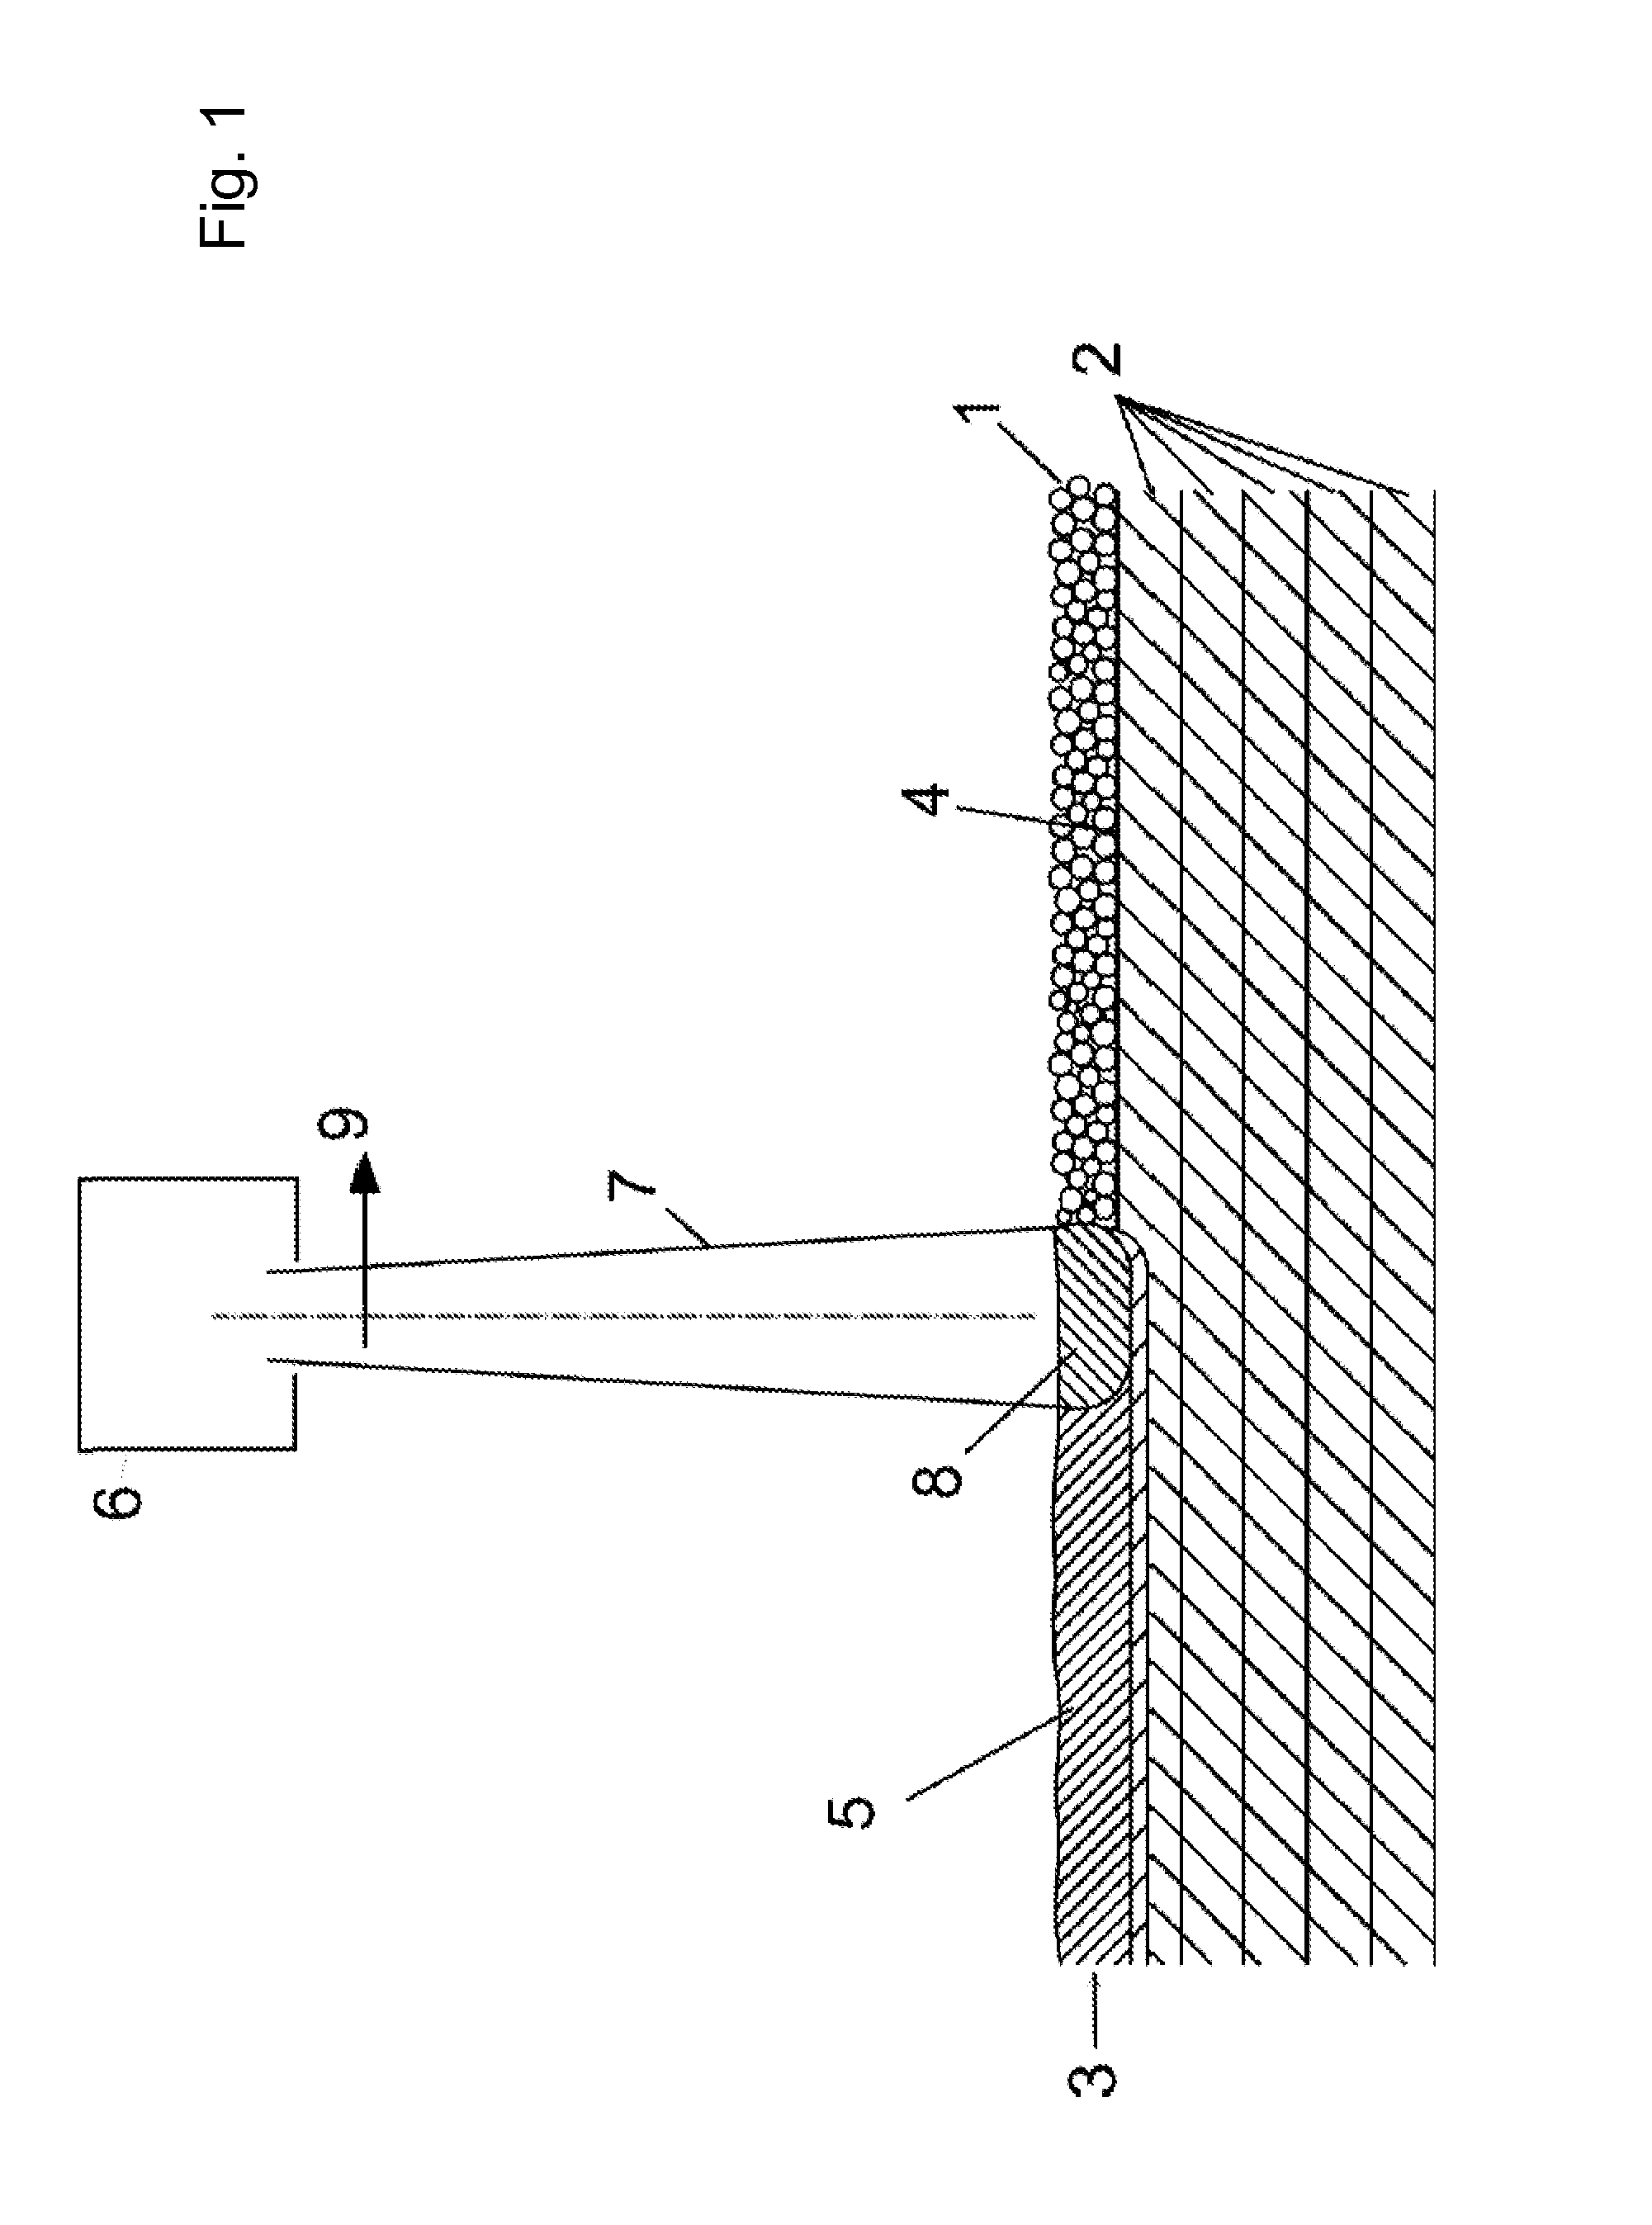 Method for Producing a Component